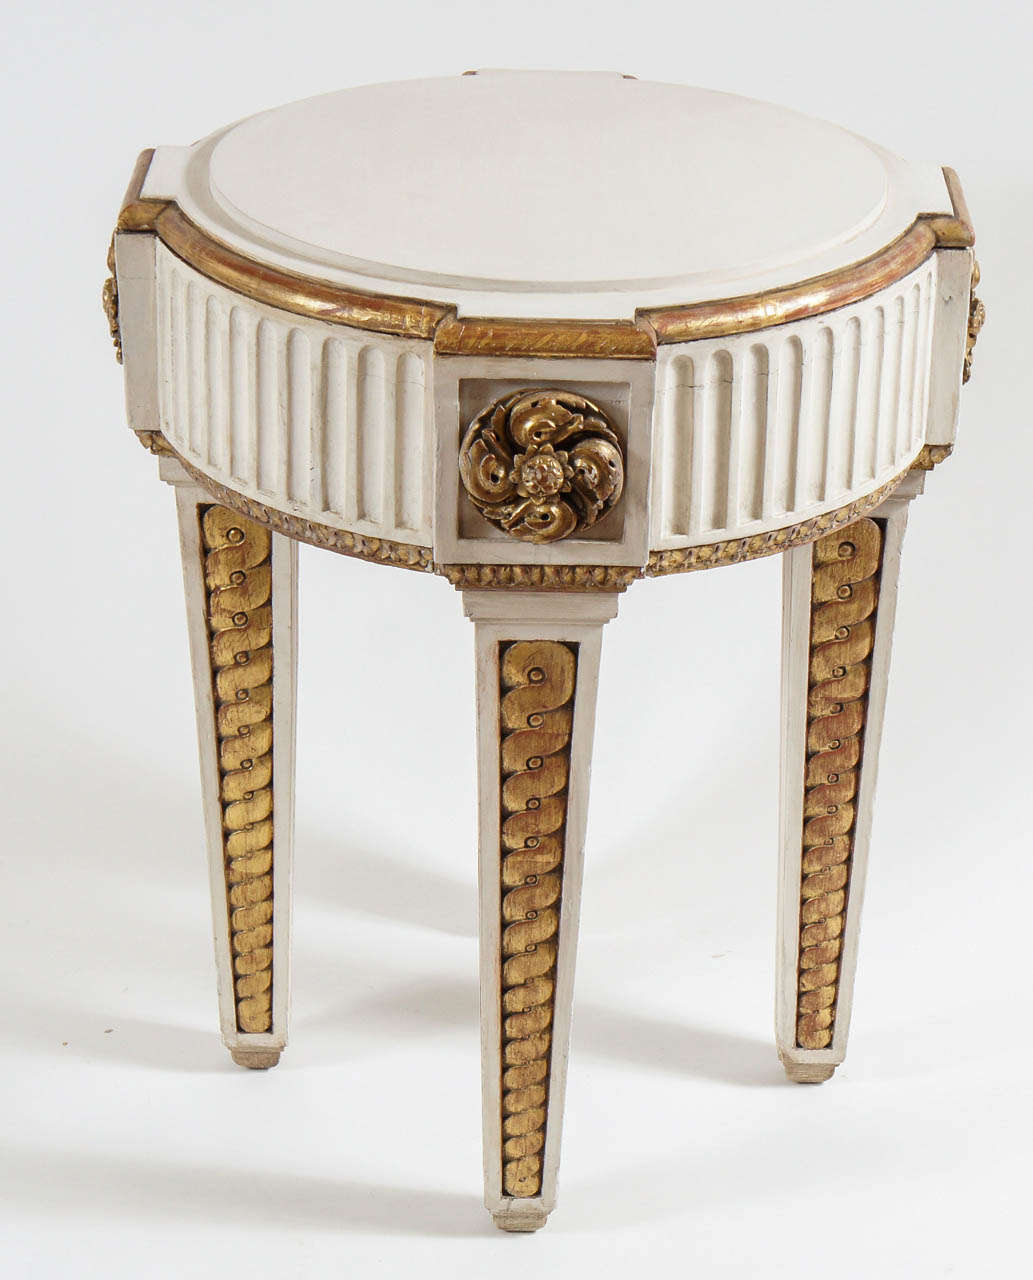 Exquisite neoclassical Napoleon III period French parcel-gilt and painted solid oak gueridon or occasional table having breakfront circular top with raised central plinth surmounting thick fluted apron with high relief carved rosettes in corner